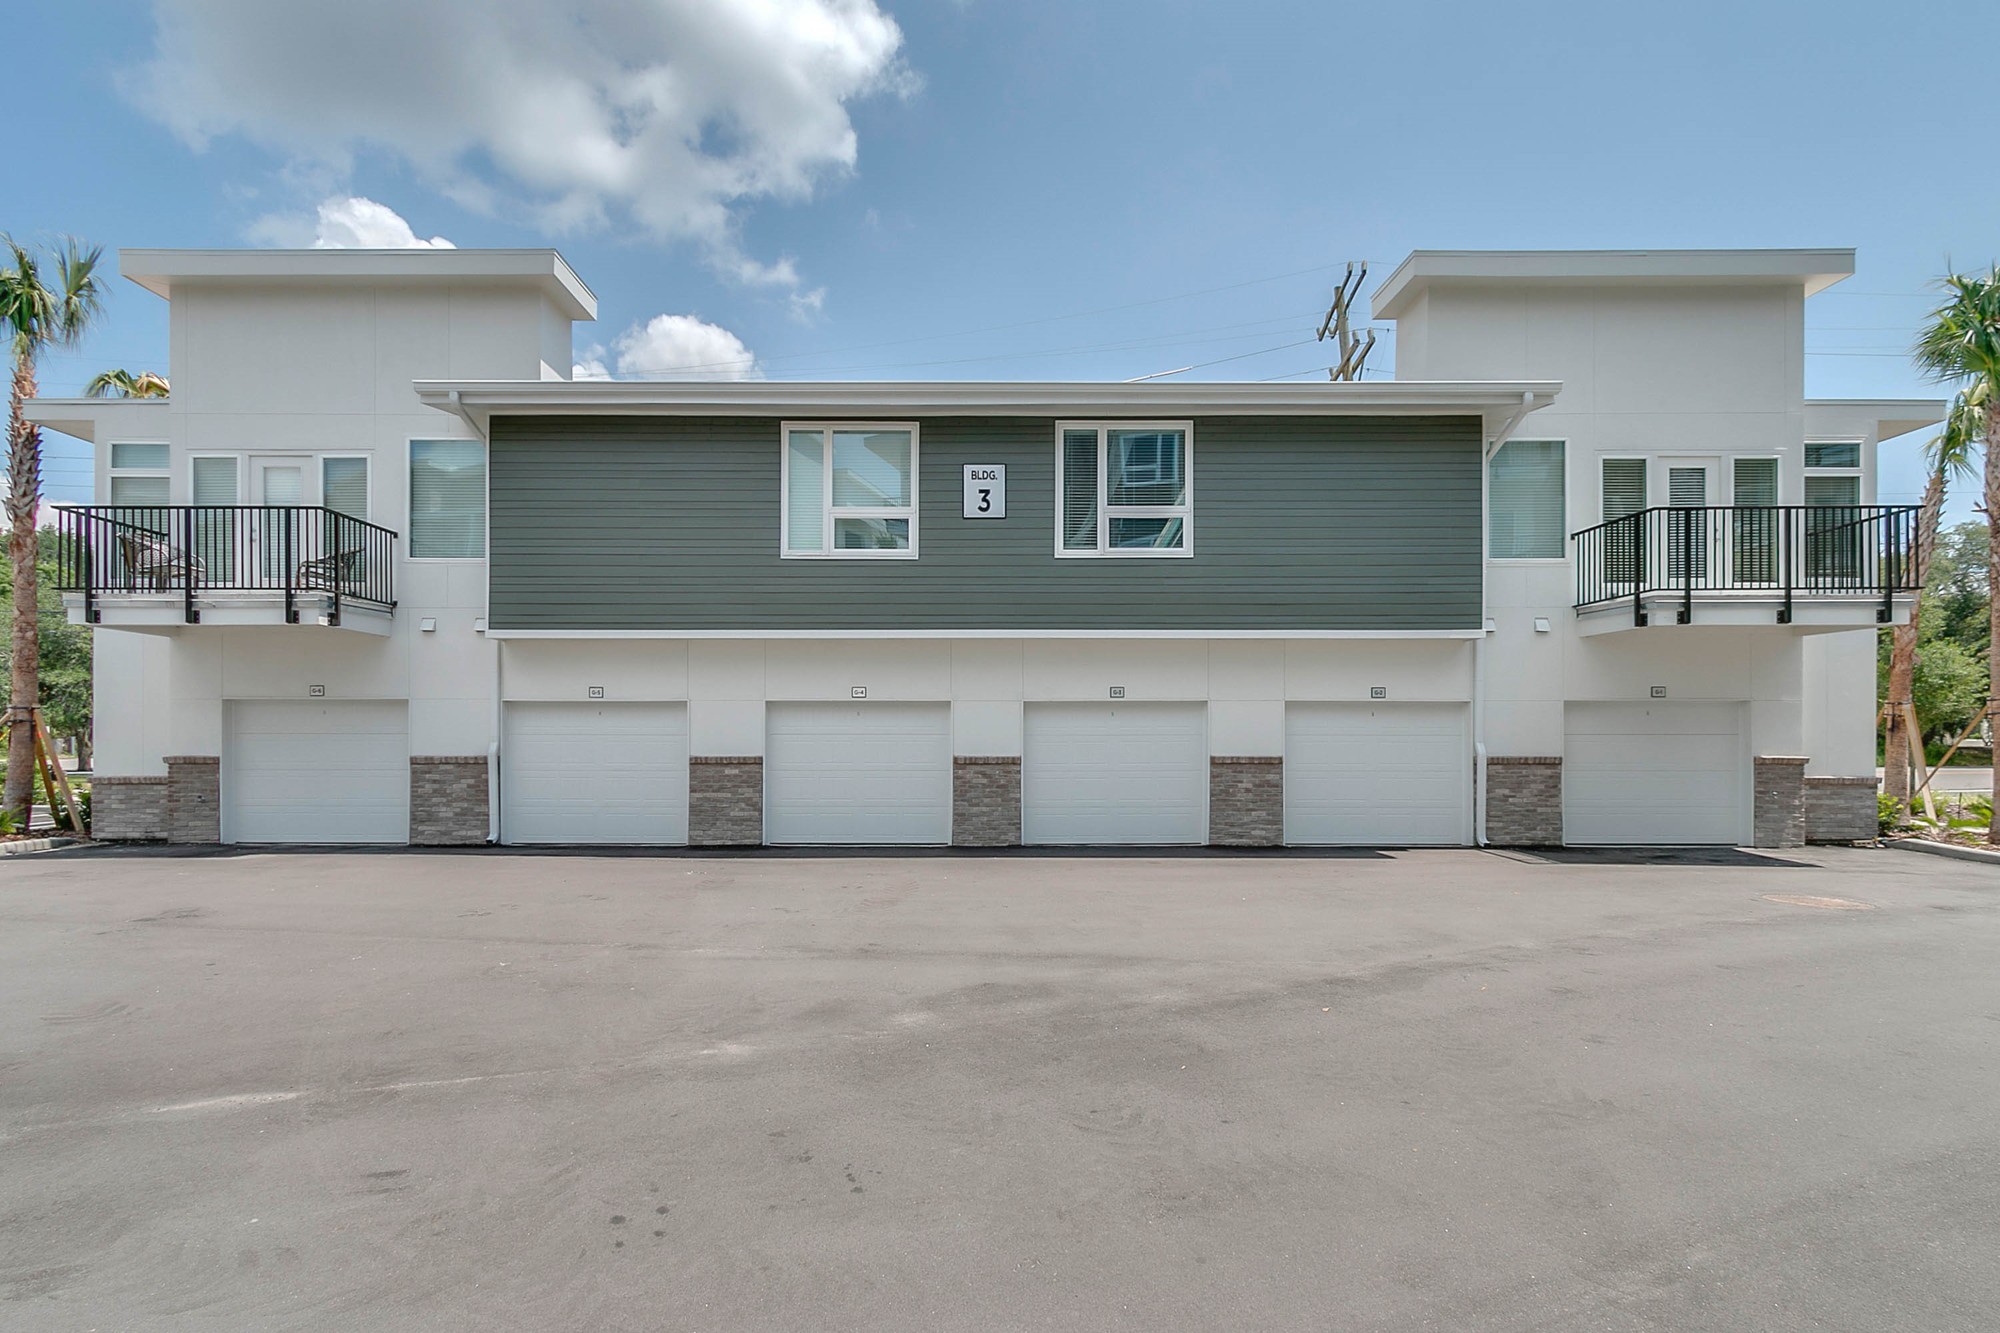 Carriage homes at RiverVue apartments. The 1,202-square-foot units rent for $2,515 a month.